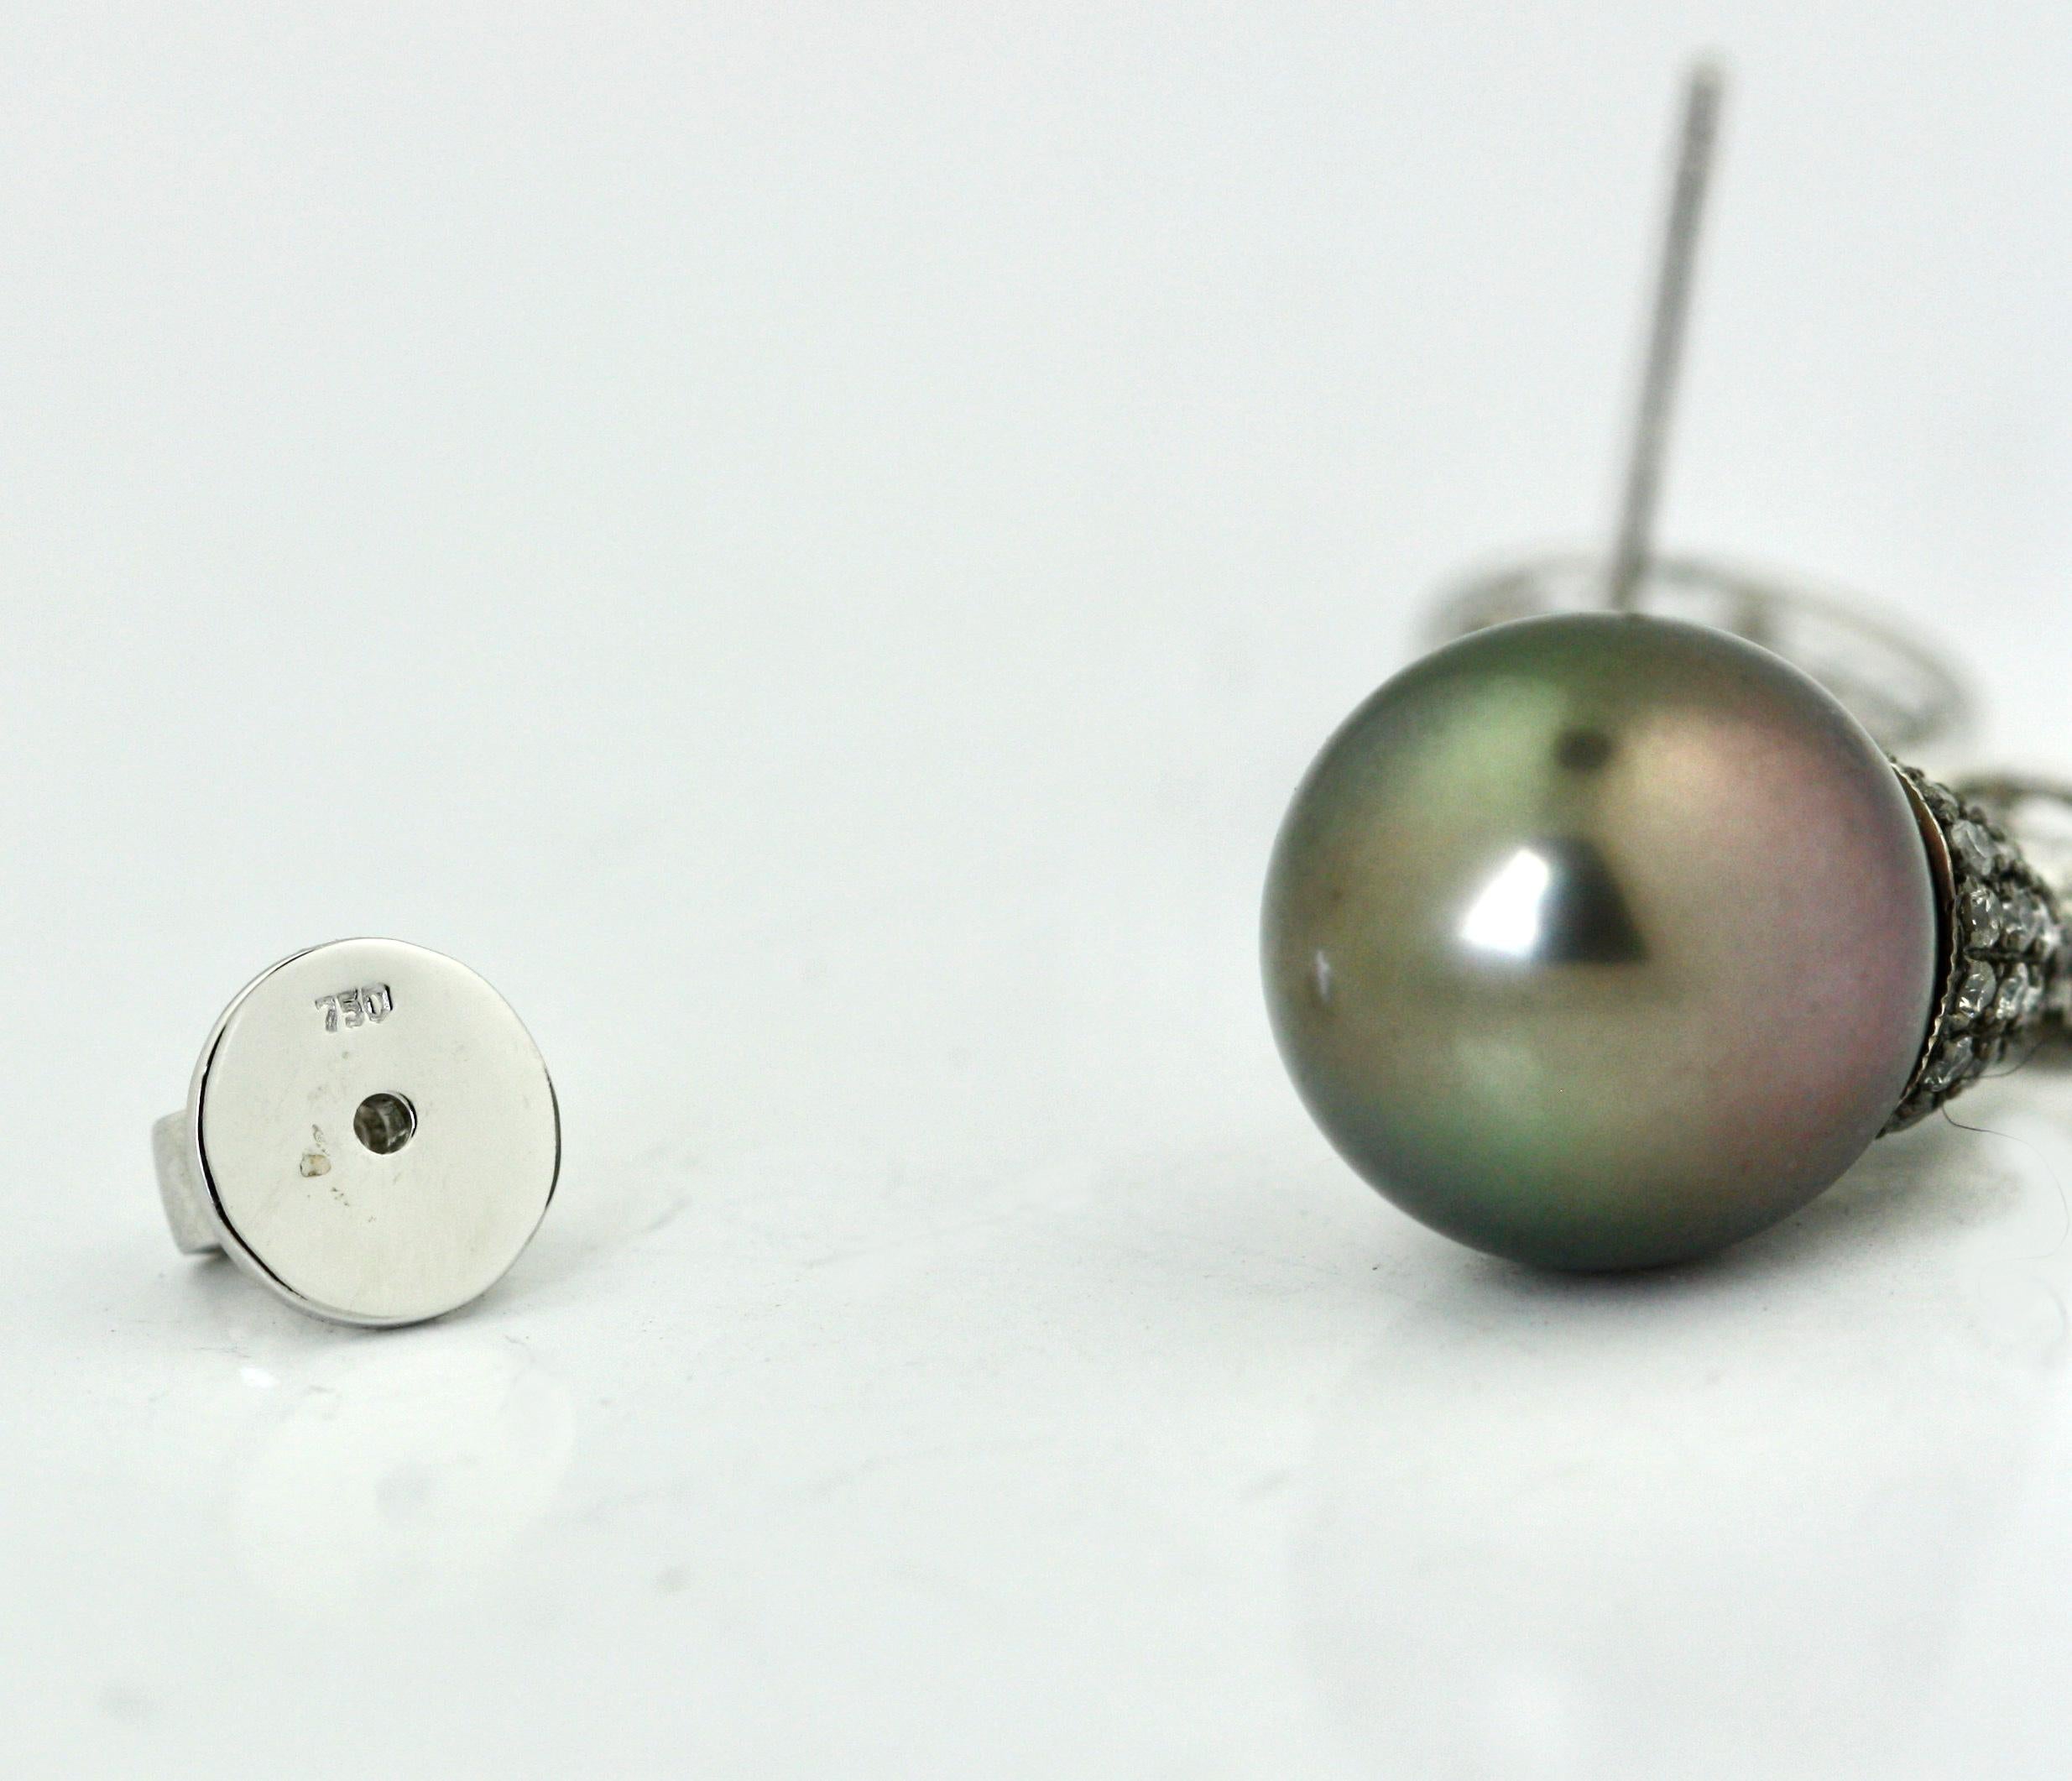 18 KT GOLD TAHITIAN PEARL AND DIAMOND EARRINGS,
approx. 12.5 MM Pearls,
approx. 1.75 CT Diamonds